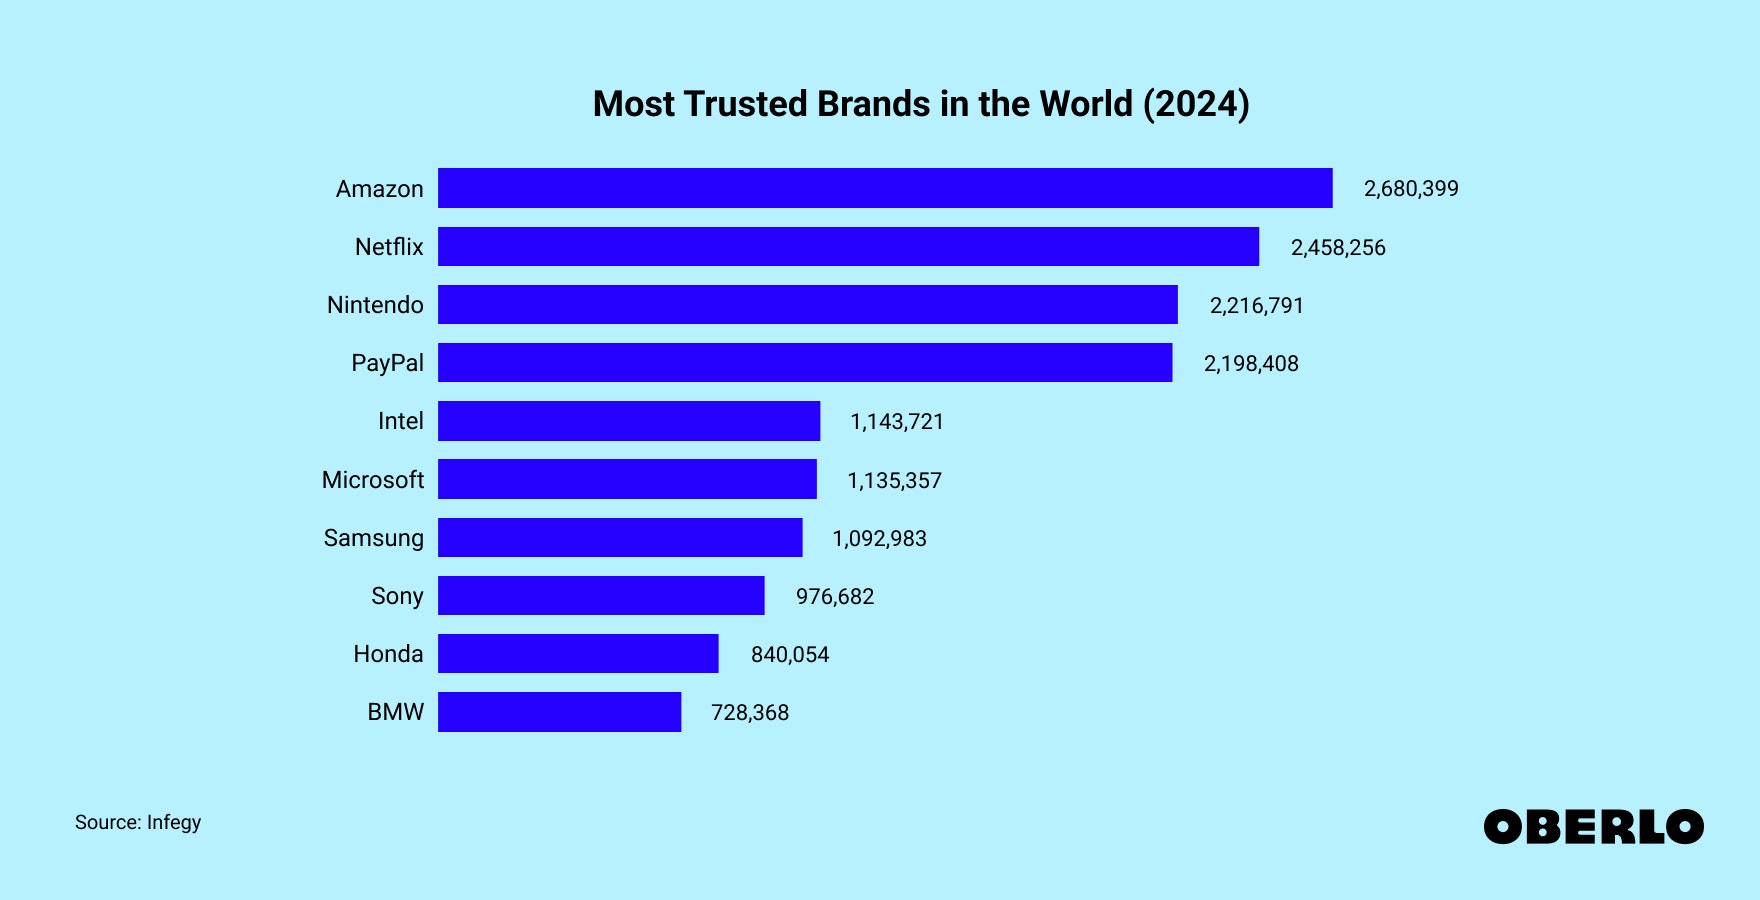 Chart showing: Most Trusted Brands in the World in 2024